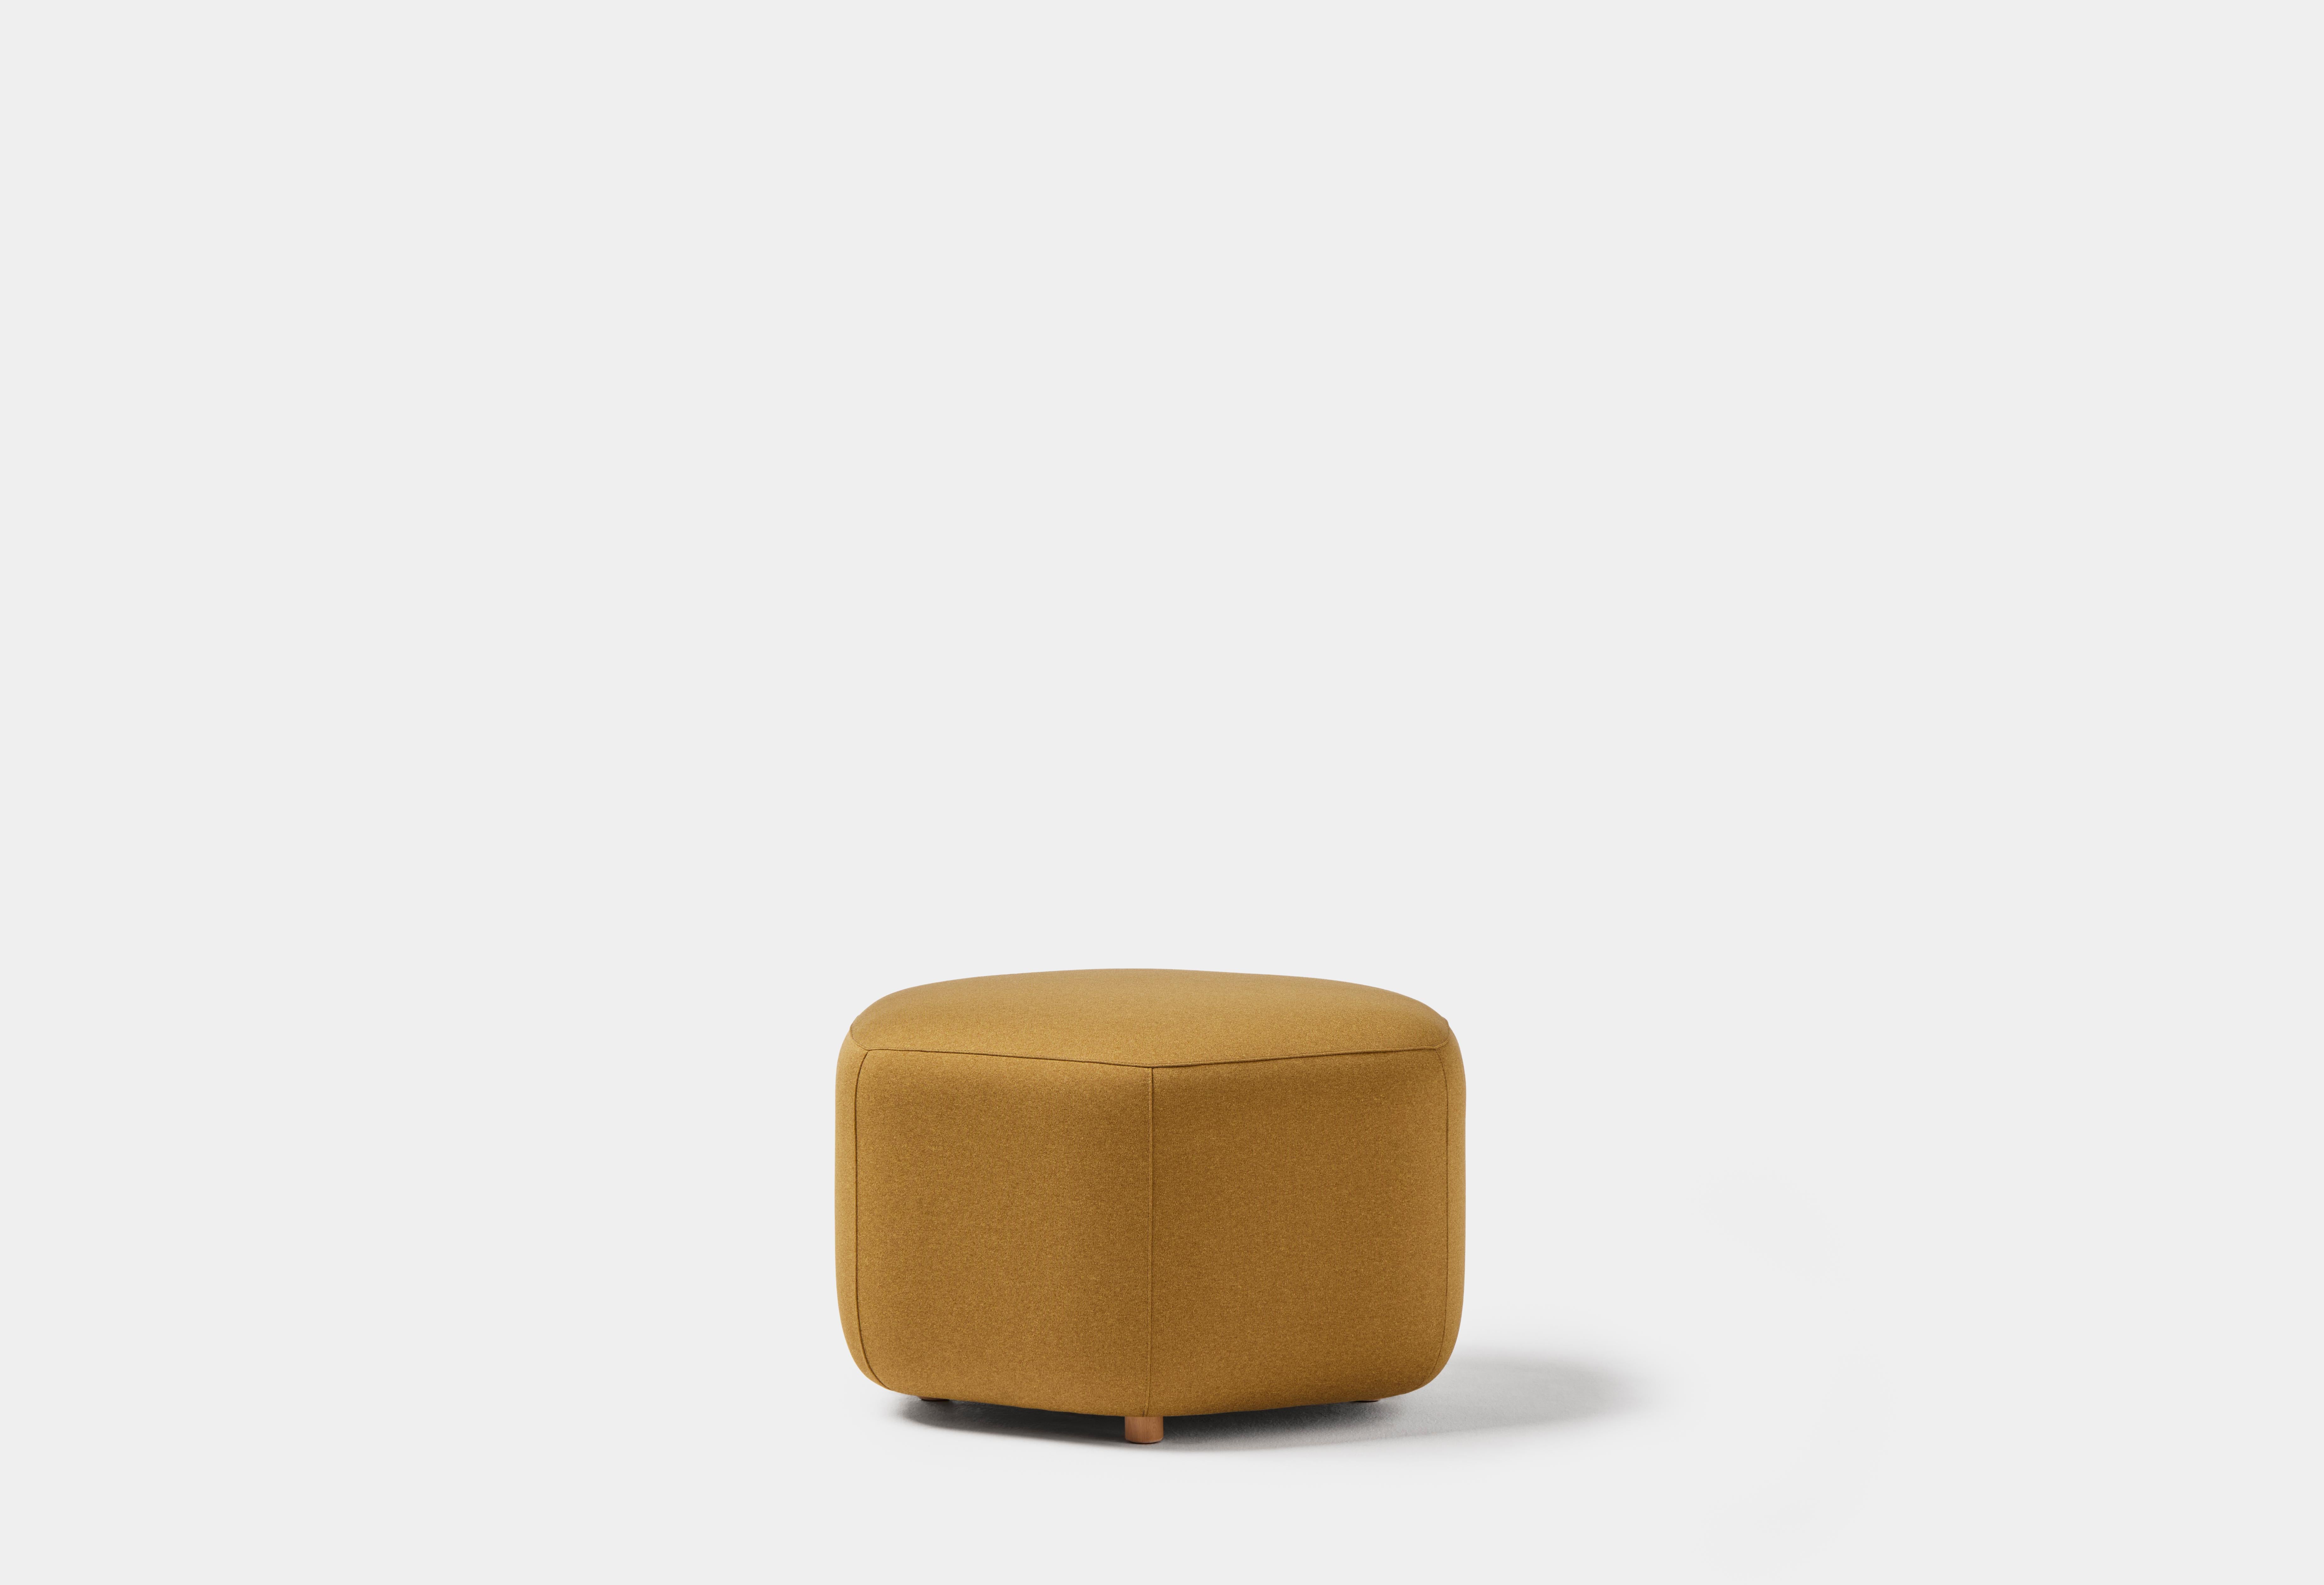 HEX ottoman by Pepe Albargues
Dimensions: W 67 x D 70 x H 44 x Seat 44
Materials: Pine wood and tablex seat structure. Backrest with metal frame, plywood and tablex board. Foam CMHR (high resilience and flame retardant) for all our cushion filling